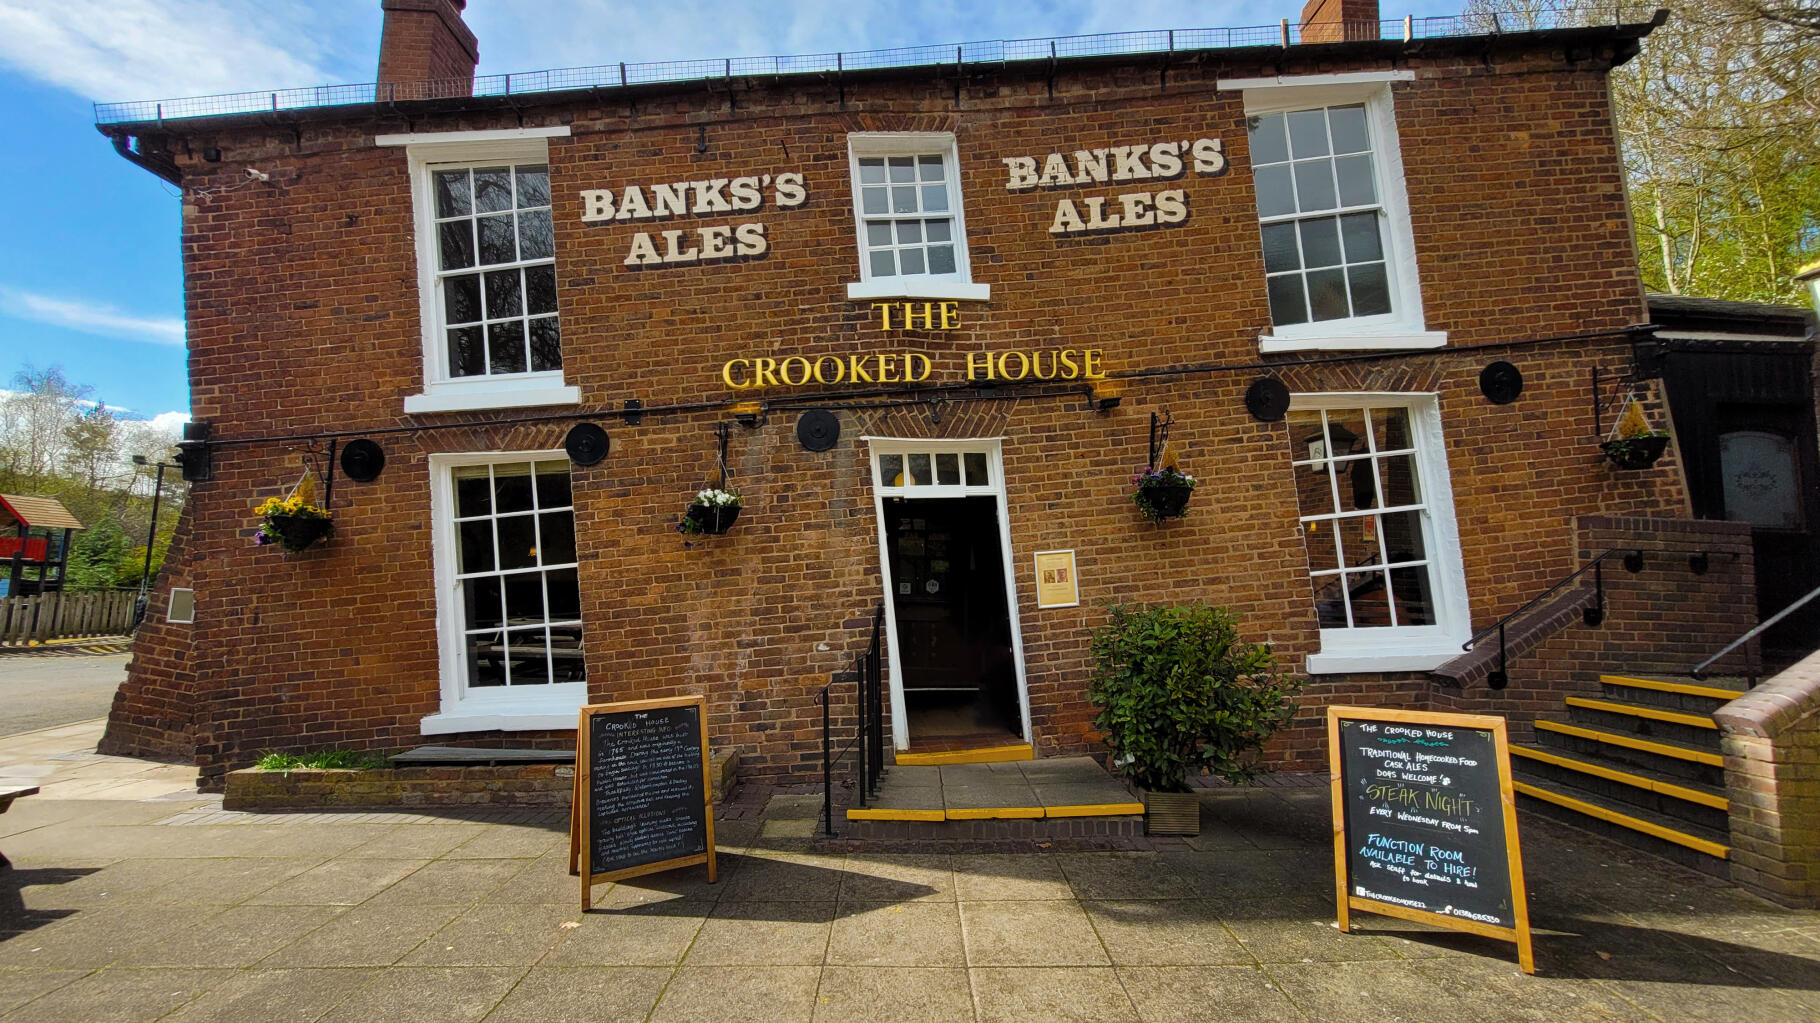 In the United Kingdom, the “Crooked House”, the country's “wobble”, will be rebuilt identically.